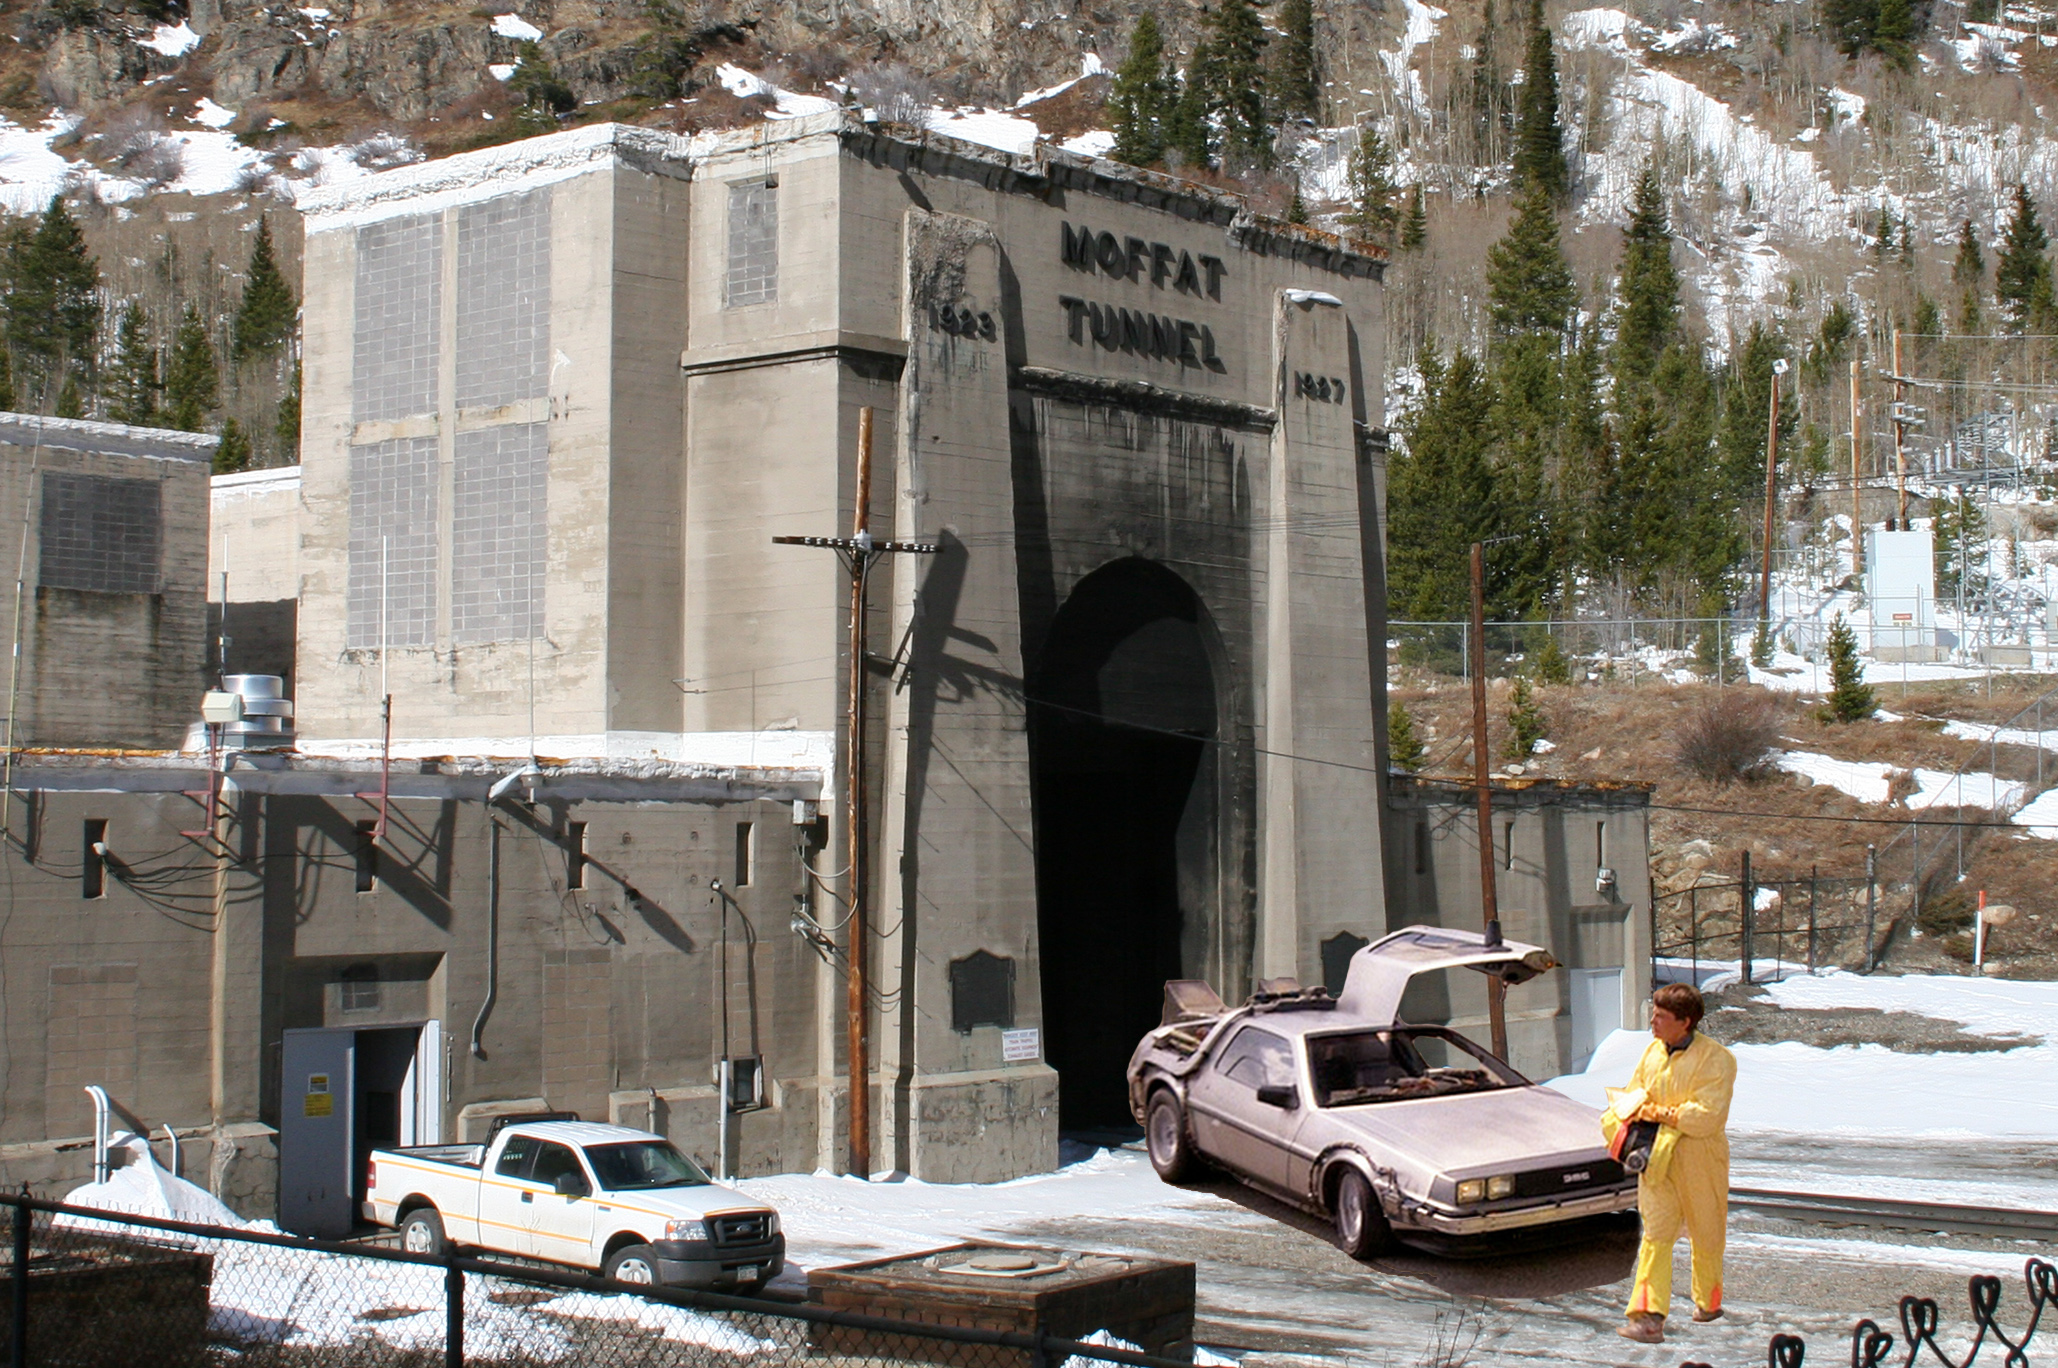 A DeLorean parked outfront of the Moffat Tunnel?